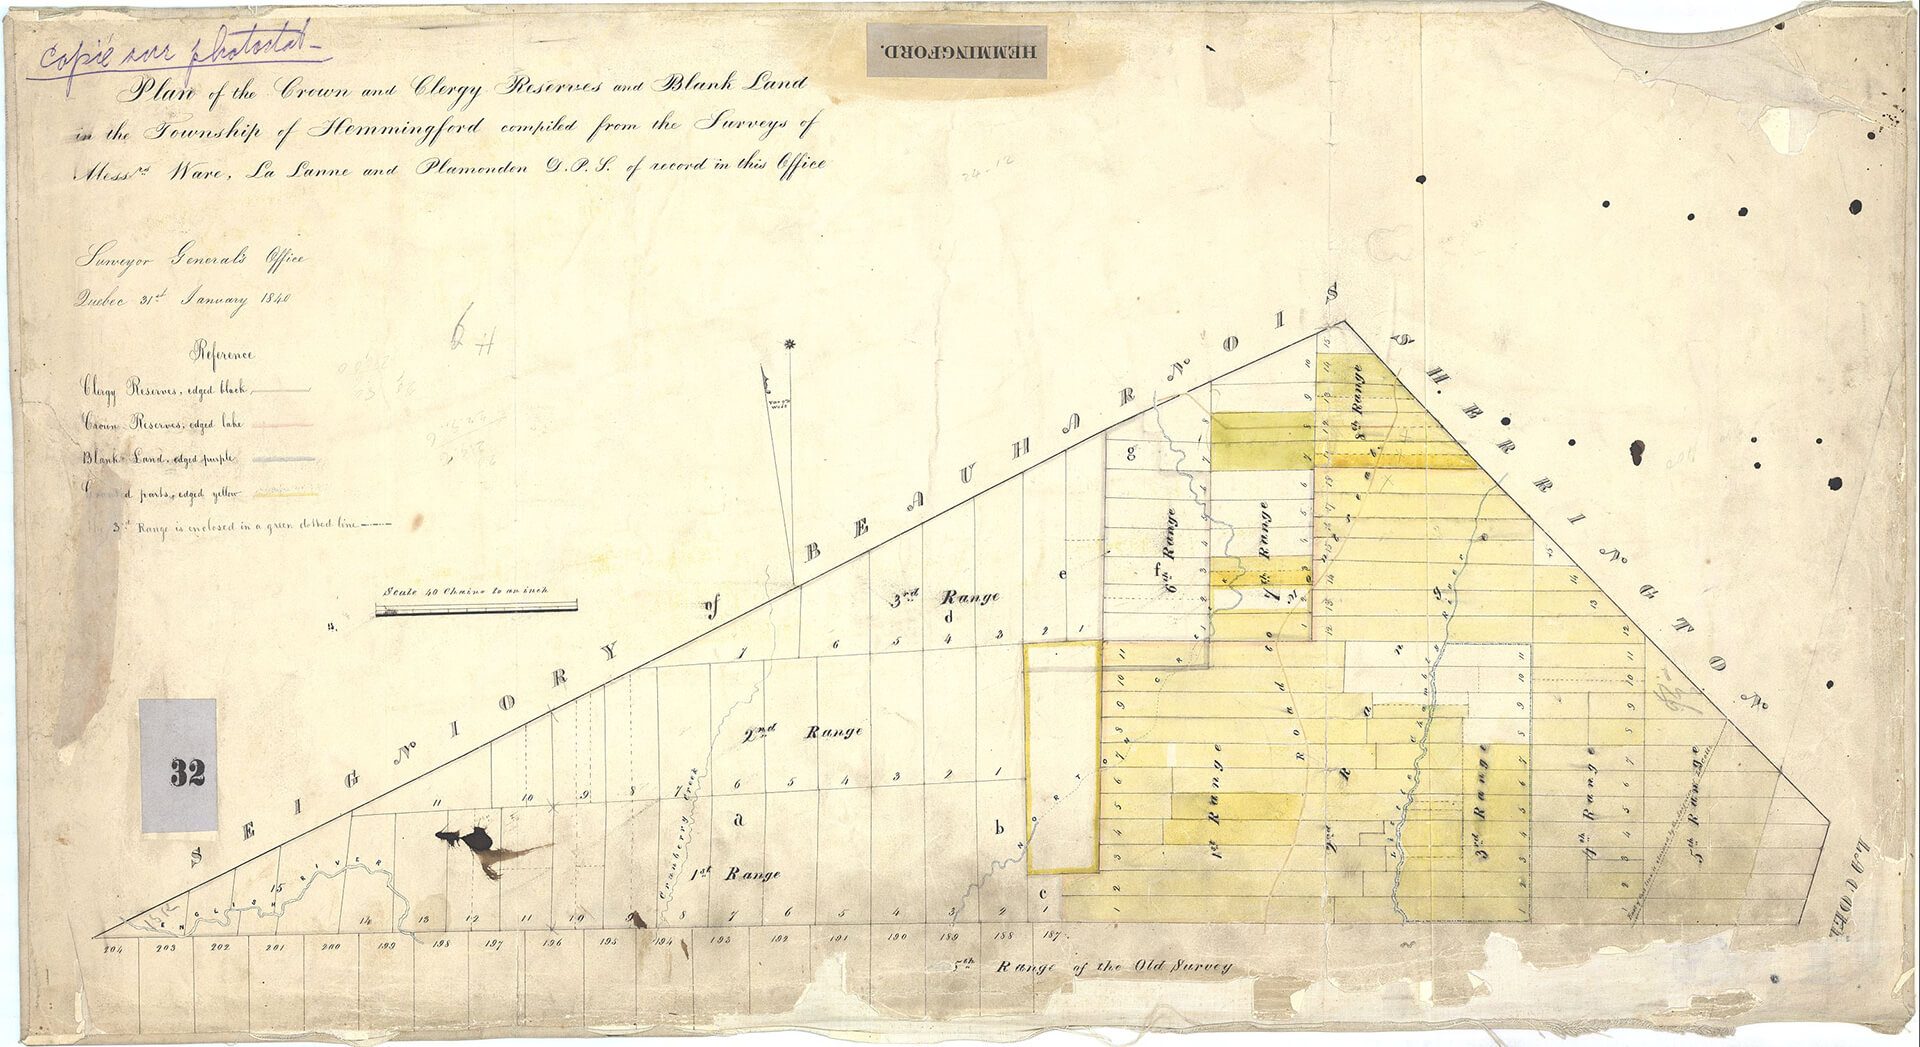 Plan of the Crown and Clergy Reserves and blank land in the township of Hemmingford compiled from the surveys of Messrs. Ware